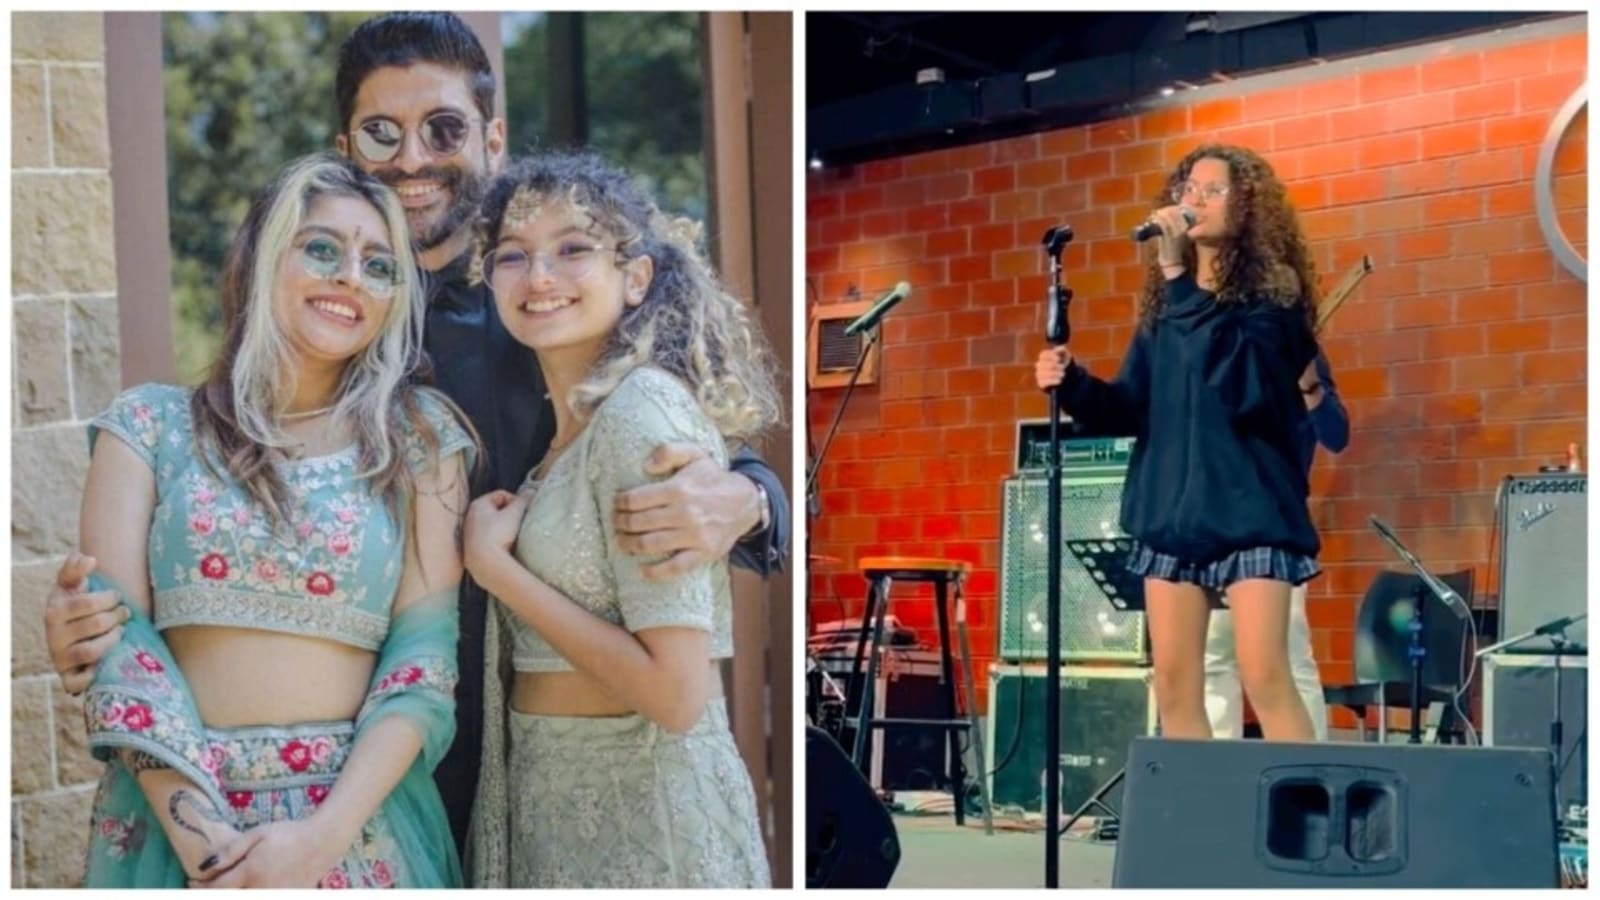 Proud dad Farhan Akhtar shares video of daughter Akira singing on stage Bollywood